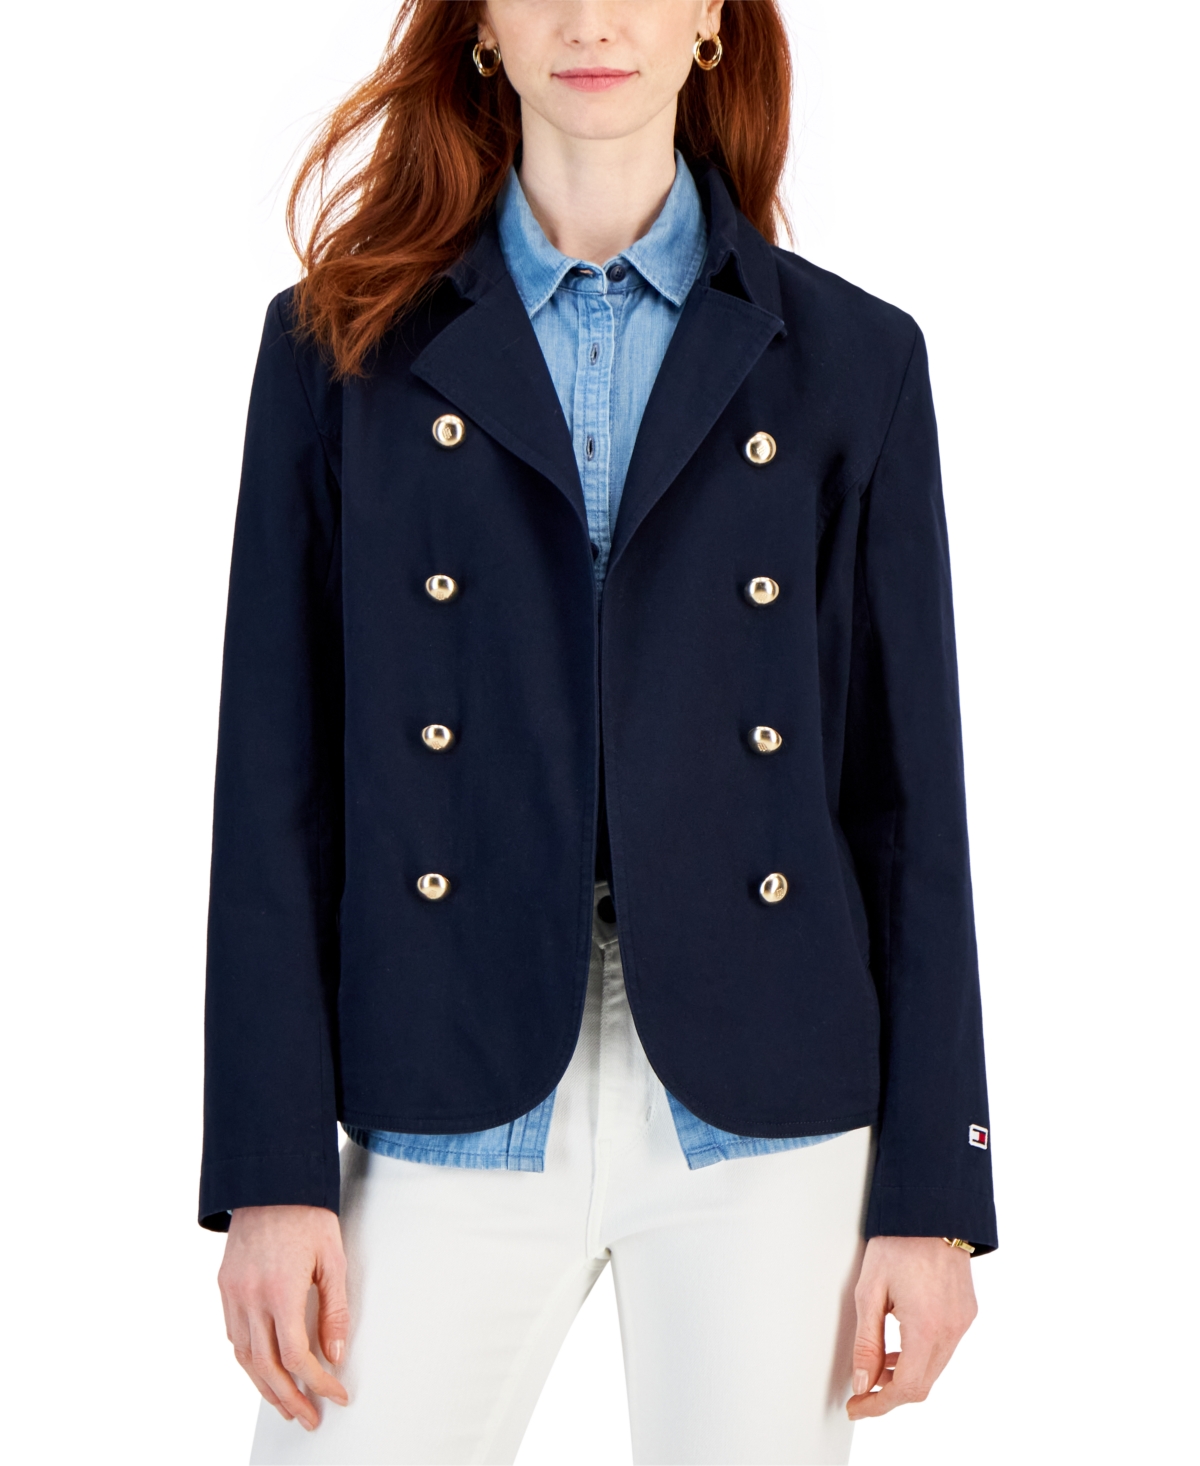 TOMMY HILFIGER WOMEN'S DOUBLE-BREASTED OPEN-FRONT JACKET